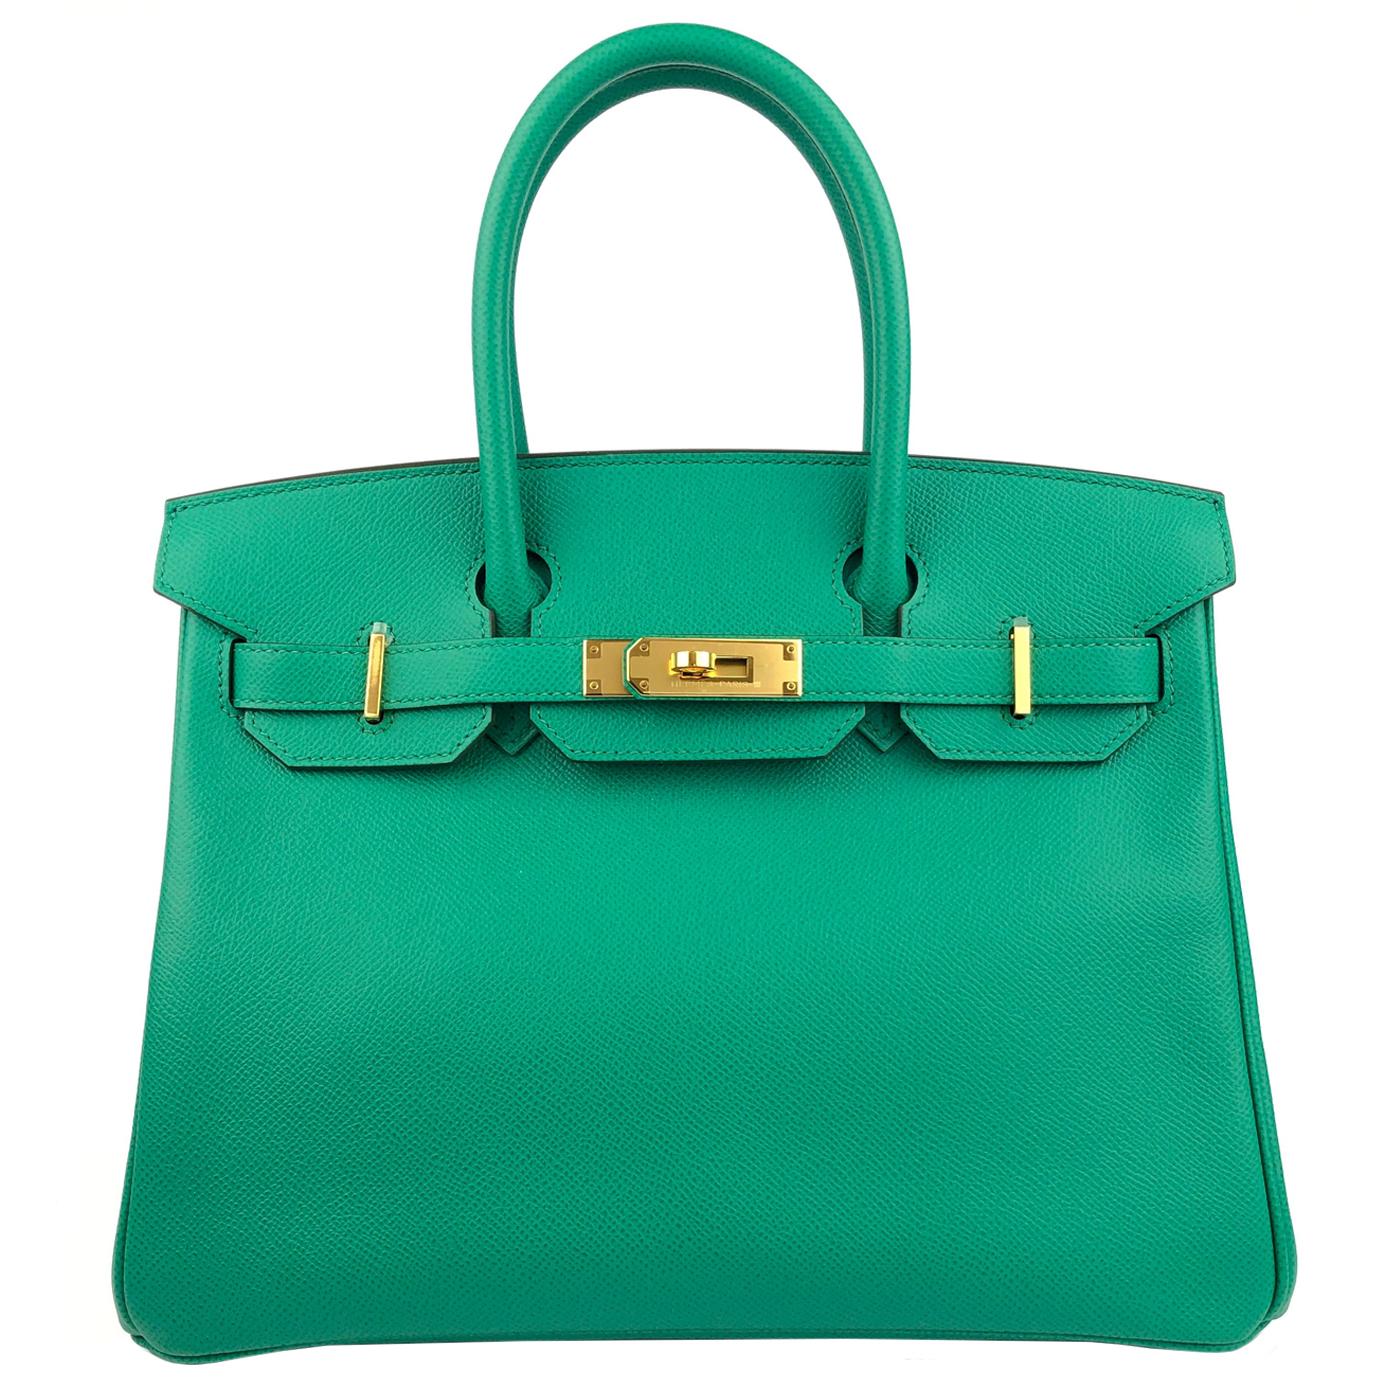 Absolutely Stunning 2022 Hermes Birkin 30 Vert Jade Epsom Leather Gold Hardware. This Birkin is in Vert Jade Epsom leather with gold hardware and has tonal stitching, a front flap, two straps with center toggle closure, clochette with lock and two